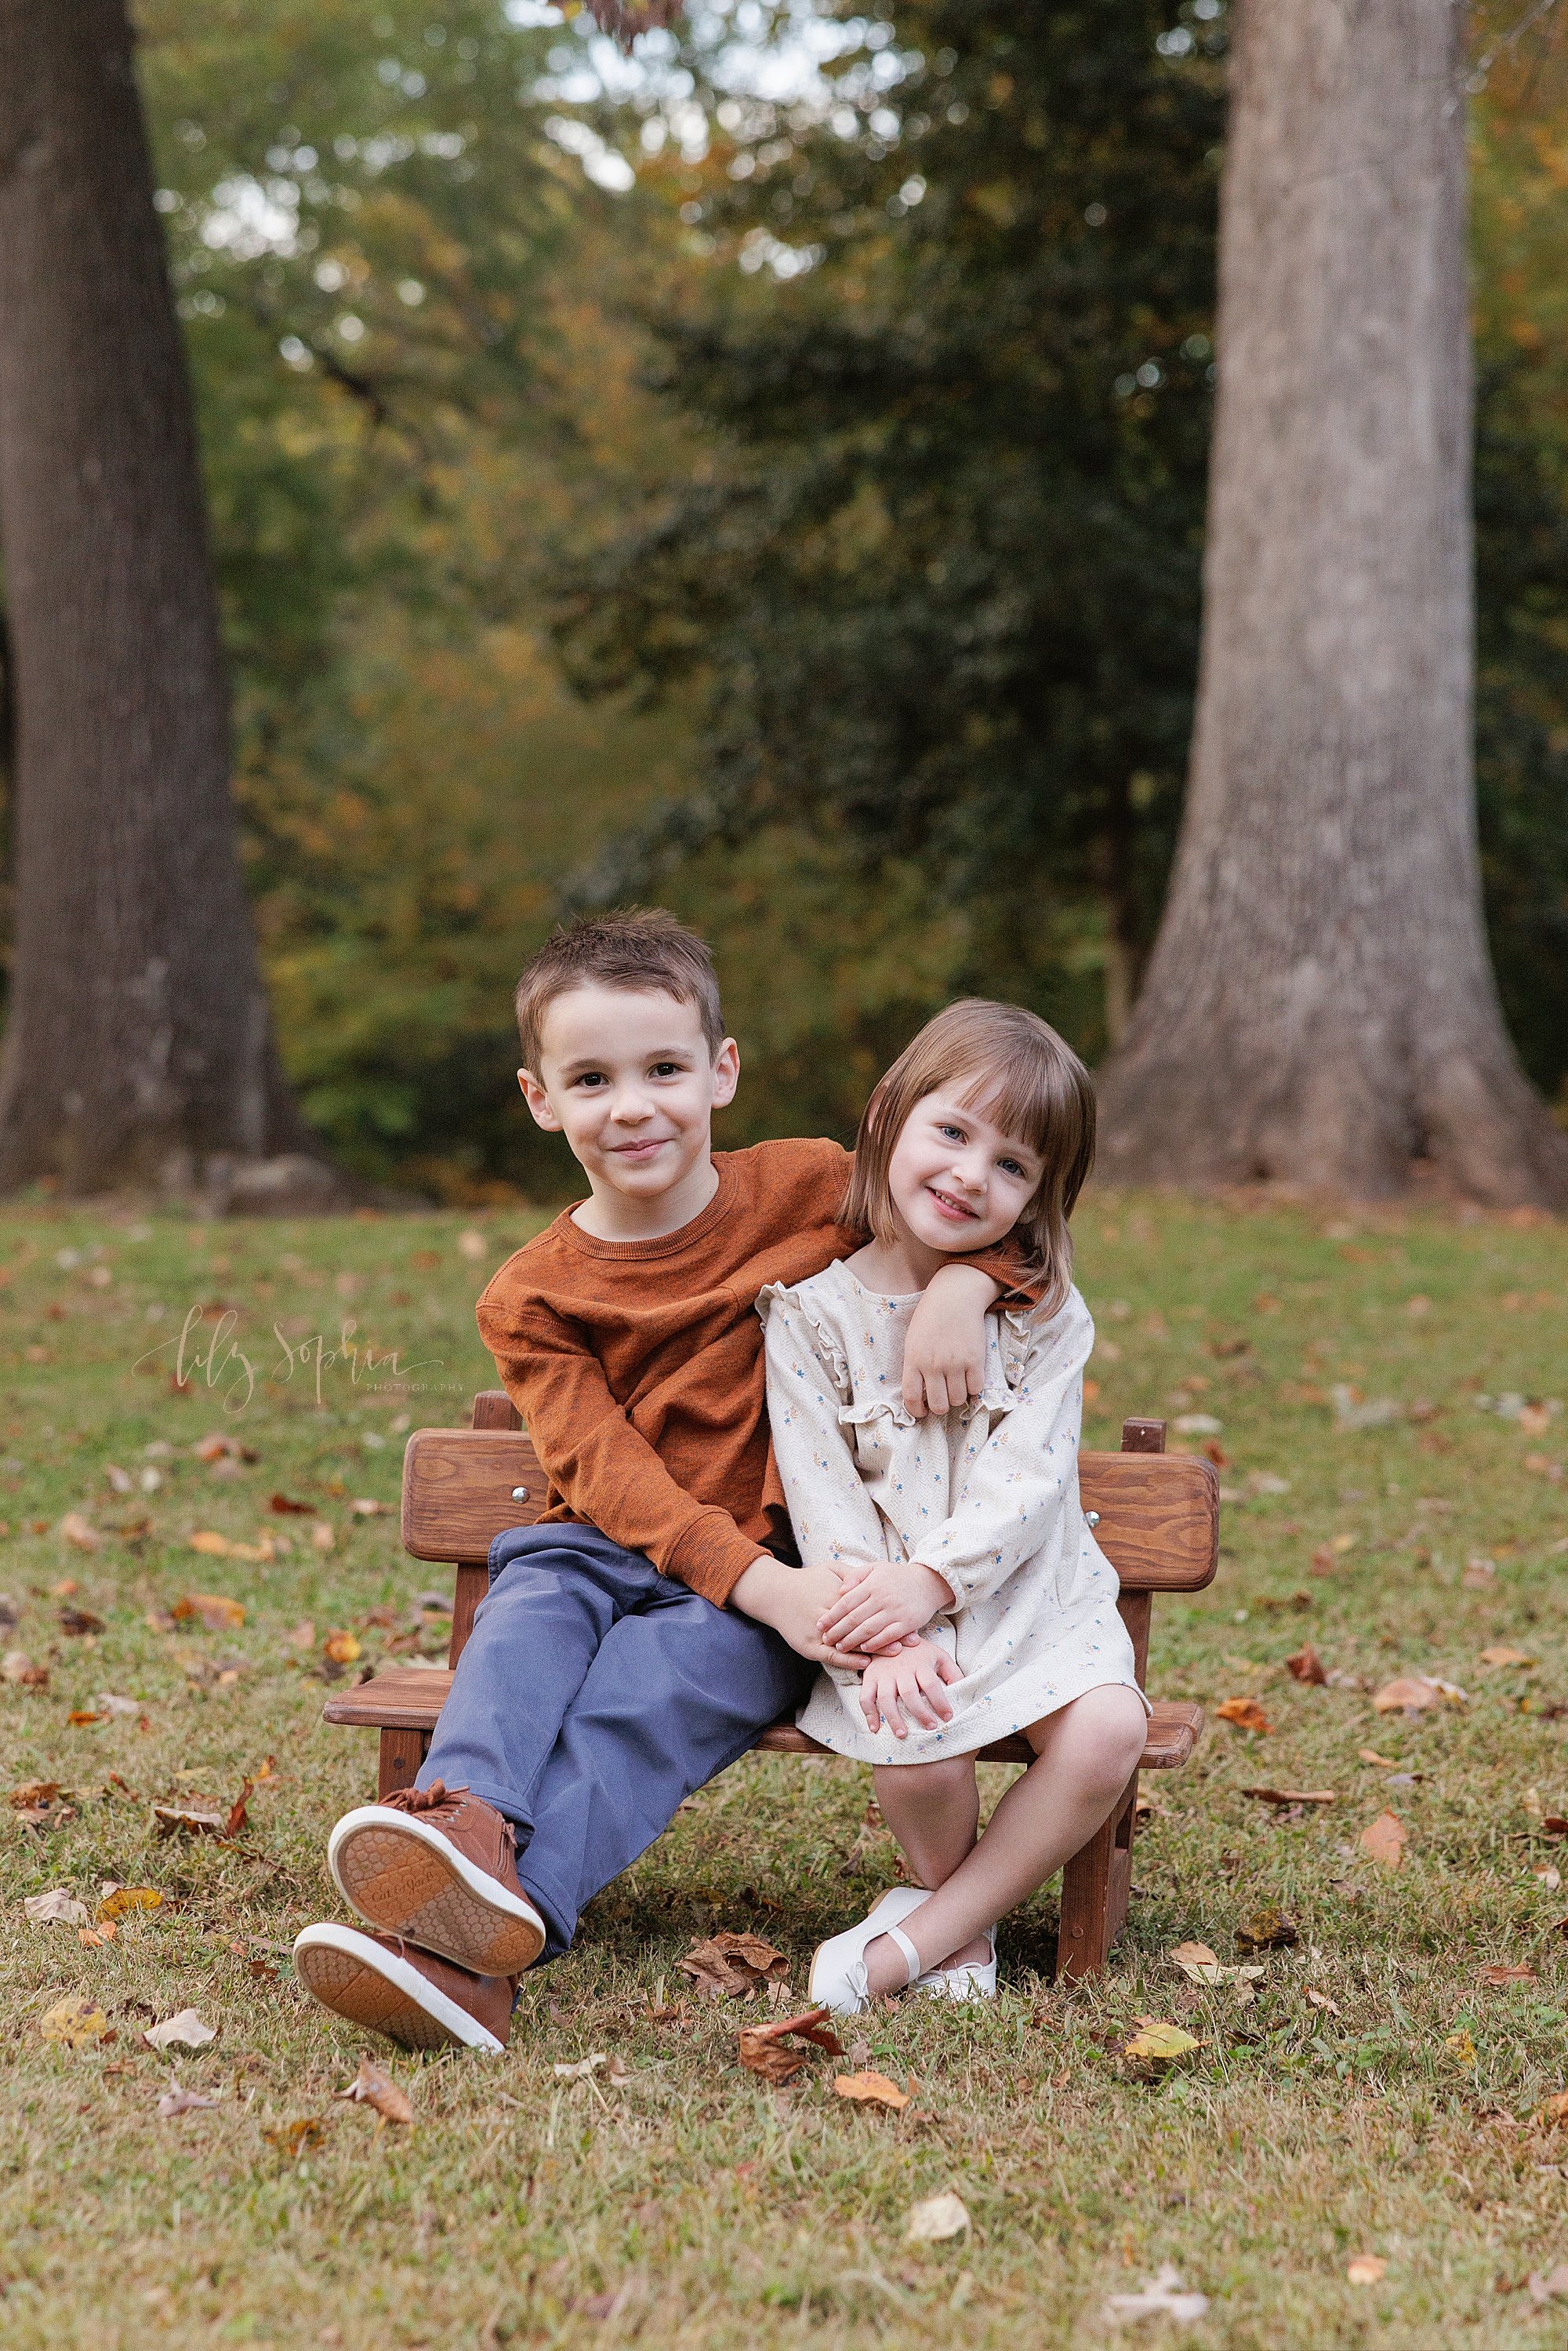 intown-atlanta-decatur-brookhaven-buckhead-outdoor-fall-pictures-family-photoshoot_5555.jpg